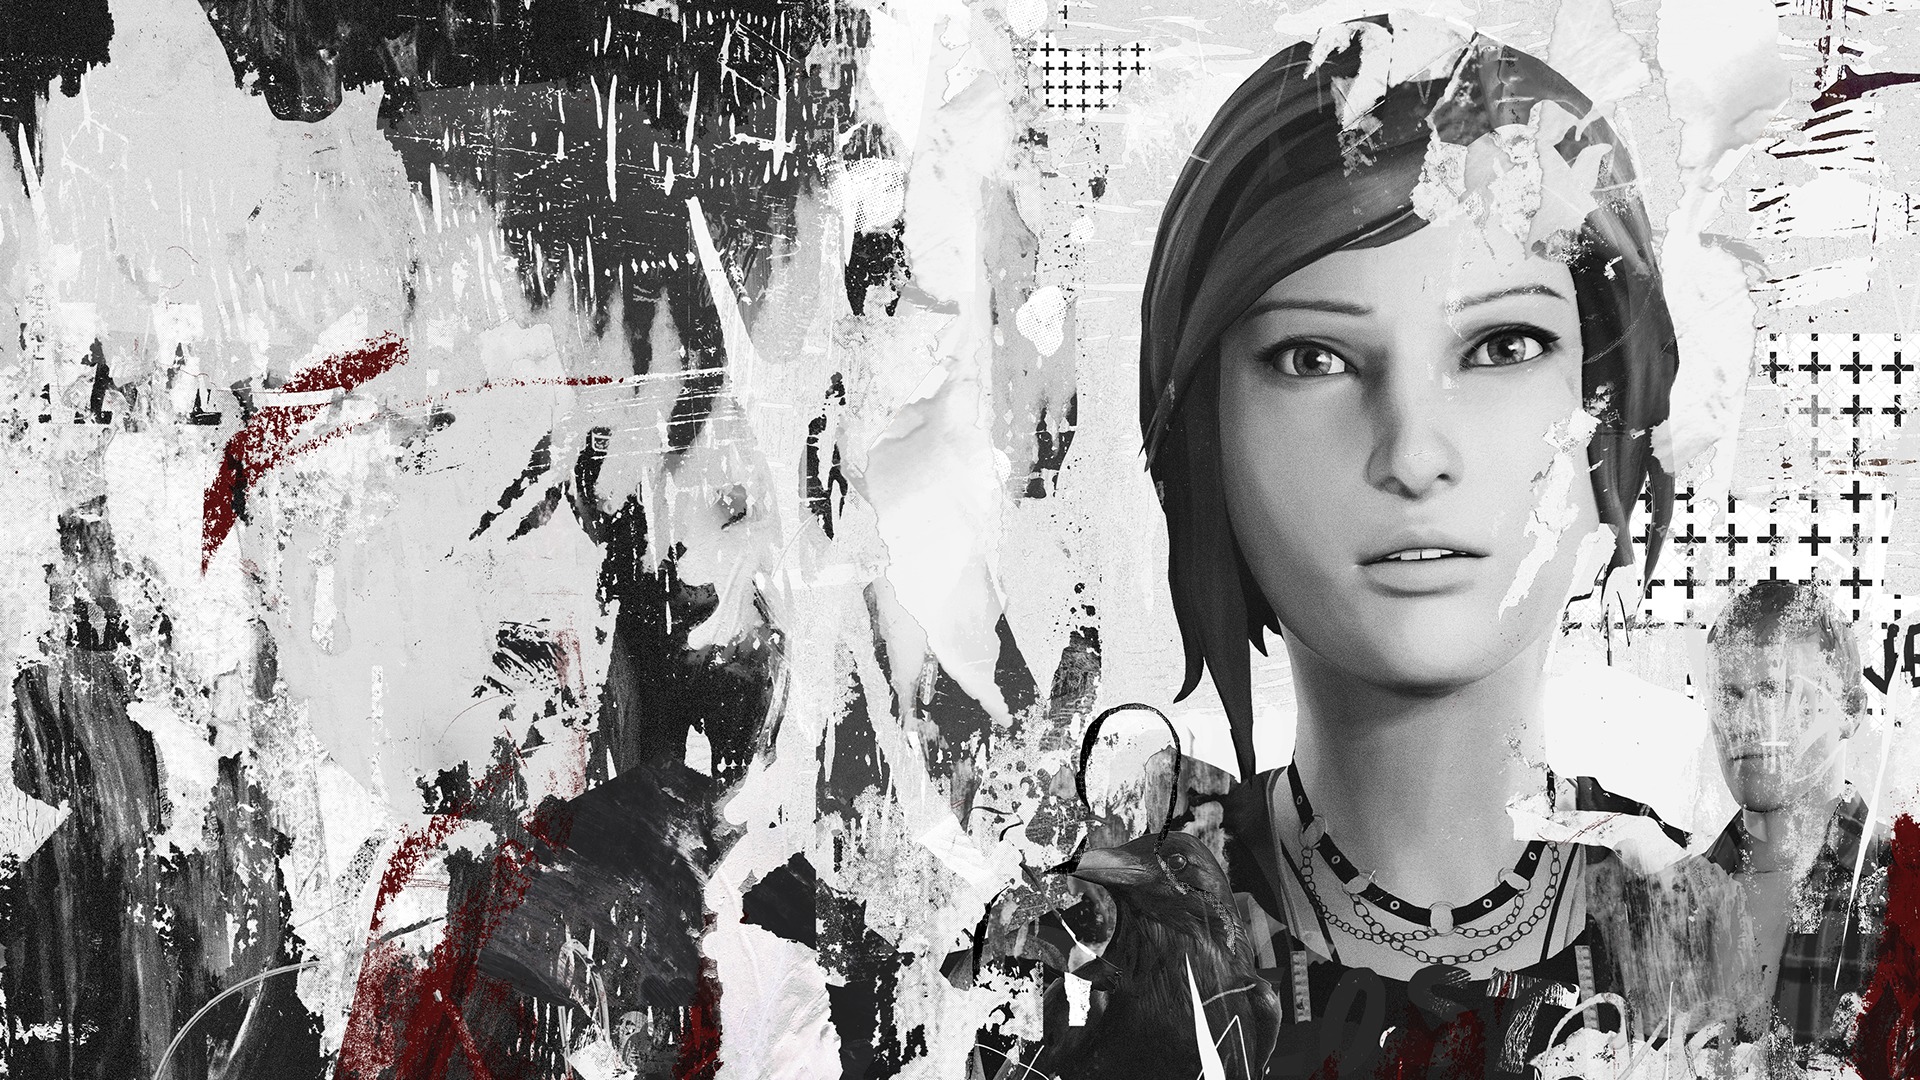 download life is strange before the storm